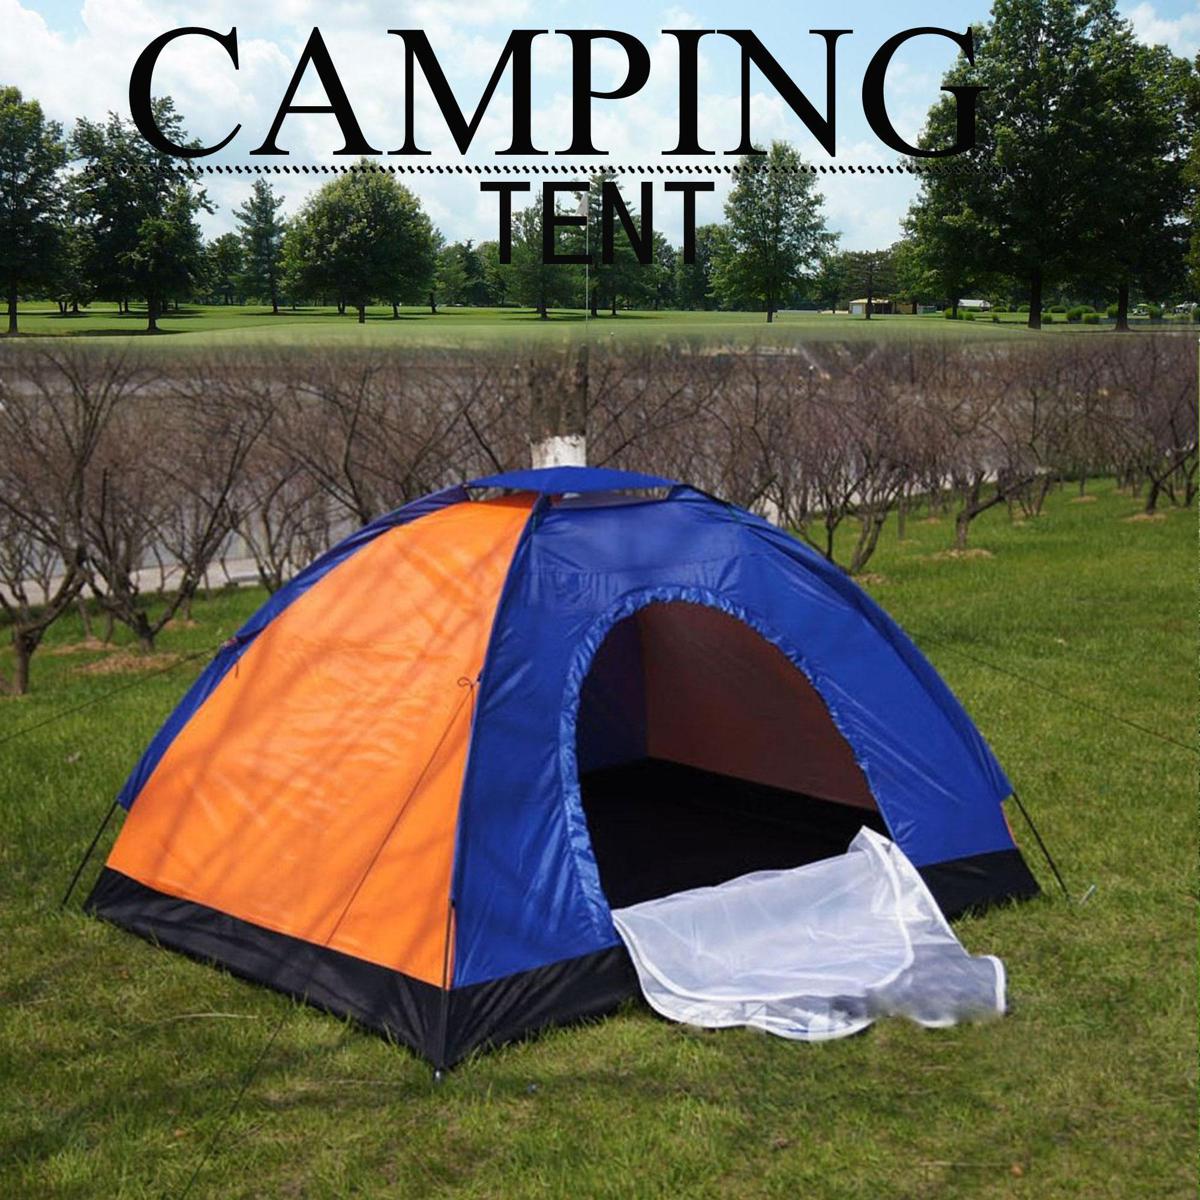 Camping Parachute Tent - 6 Persons Multicolor